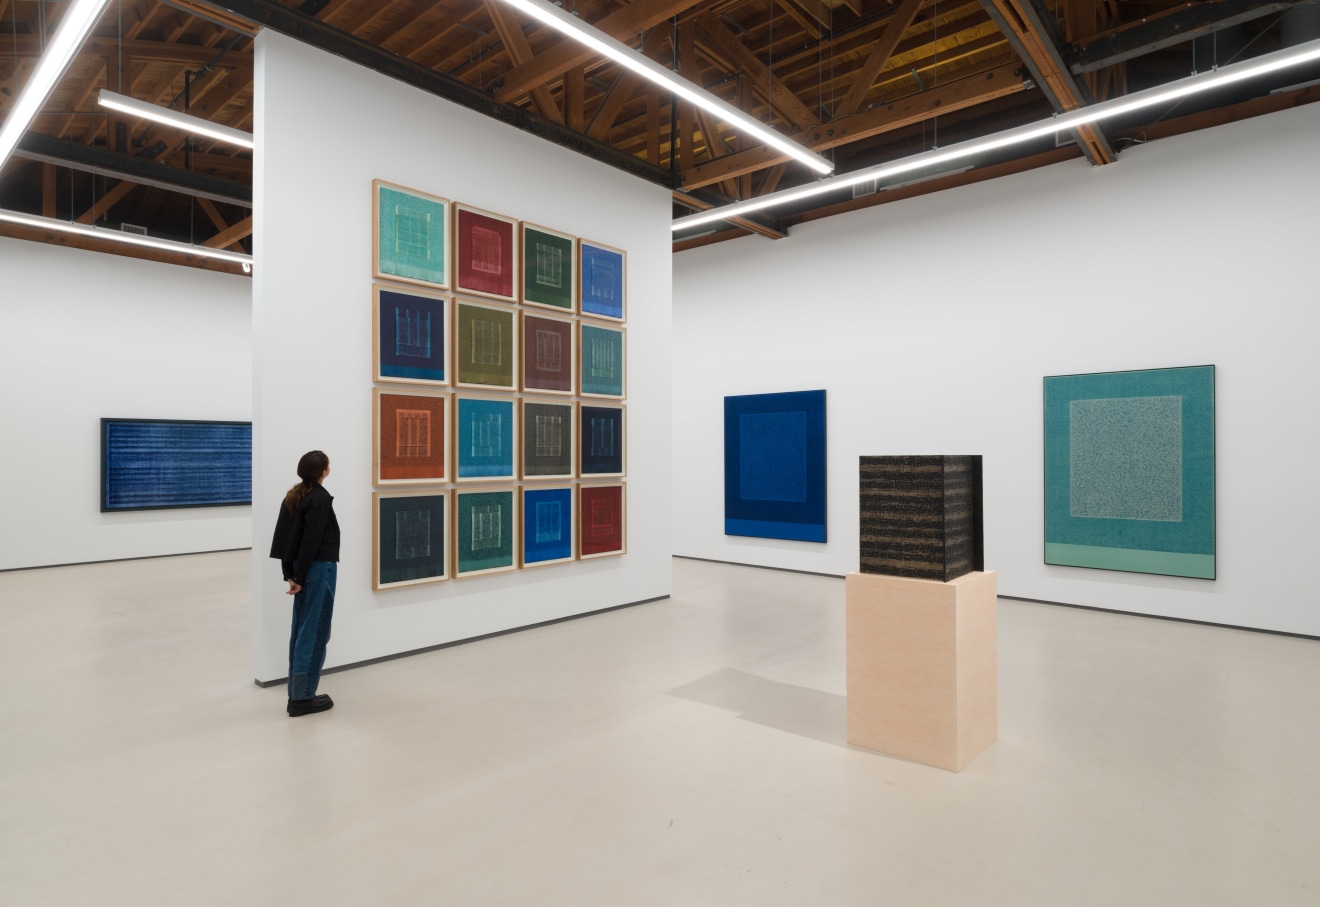 Installation view of Idris Khan: The Pattern of Landscape at Sean Kelly, Los Angeles, September 17 - November 5, 2022, Photography: Jeff McLane, Courtesy: Sean Kelly